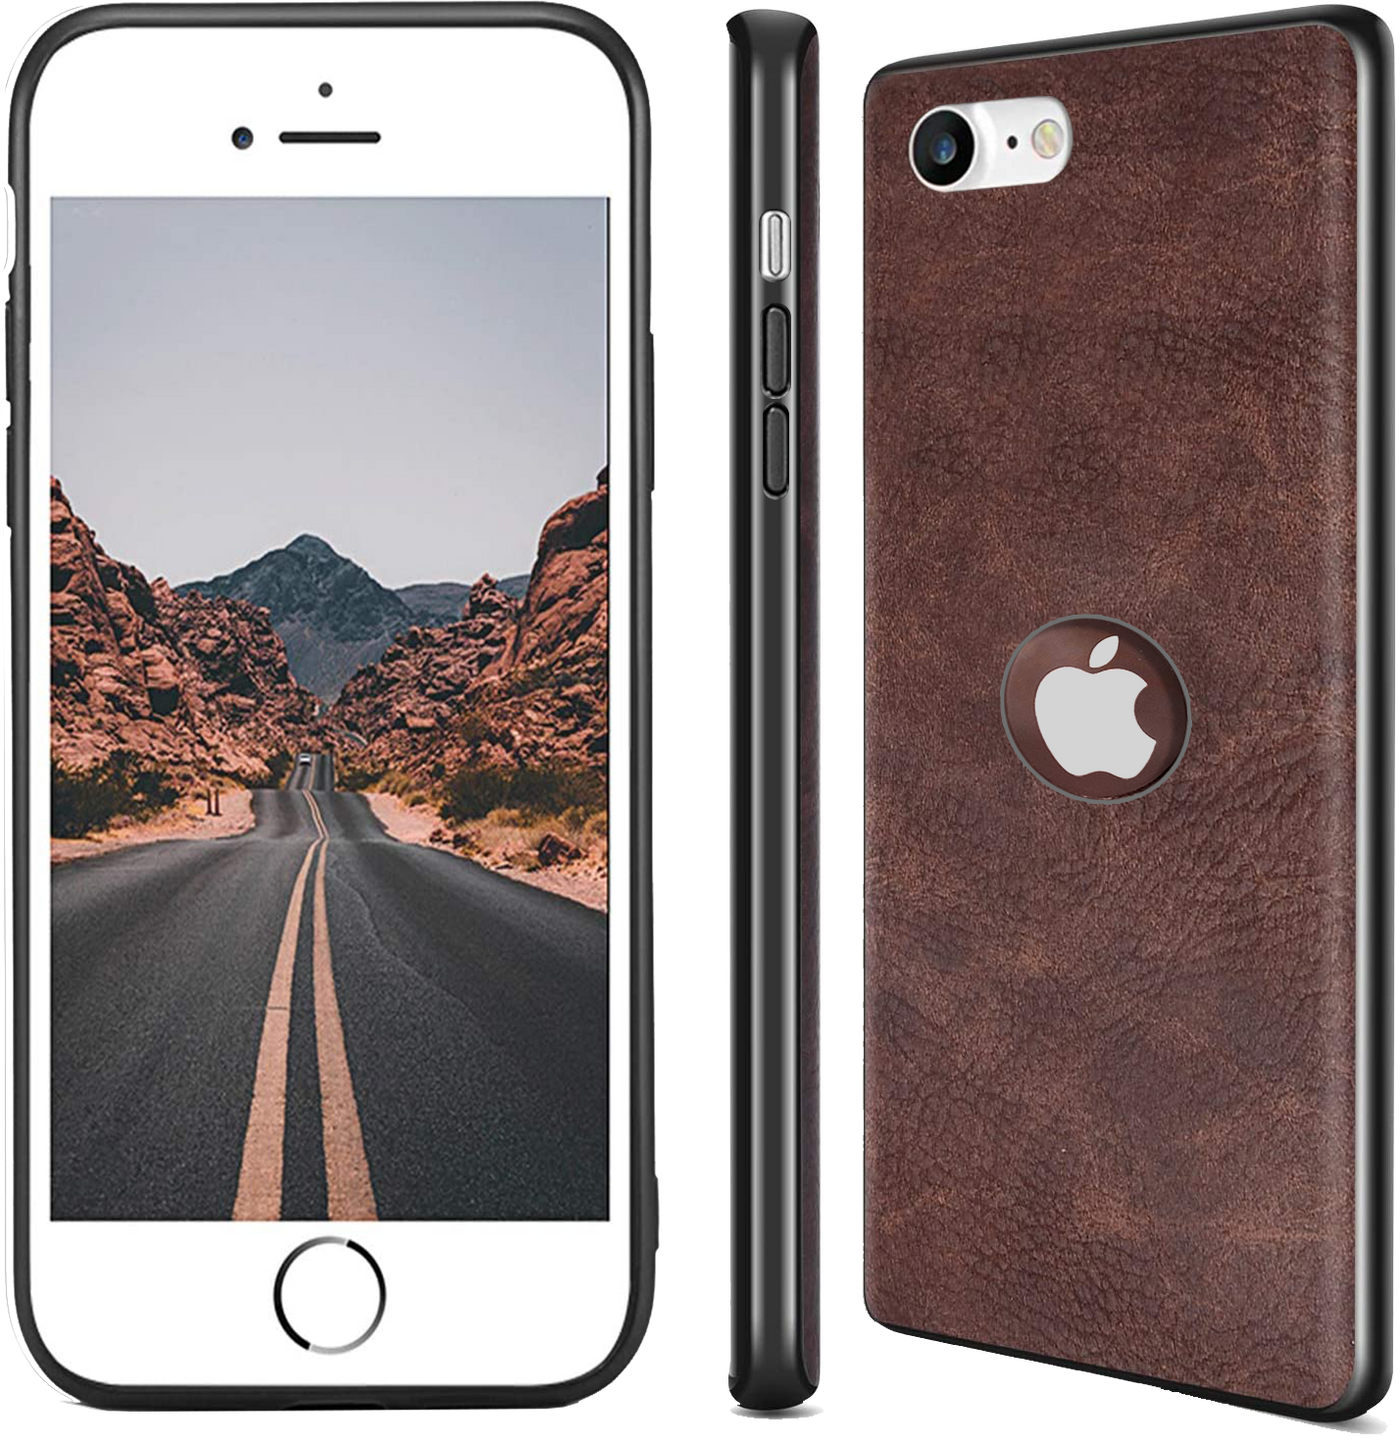 Apple iPhone SE 2020 iPhone 7 iPhone 8 coffee color back cover case